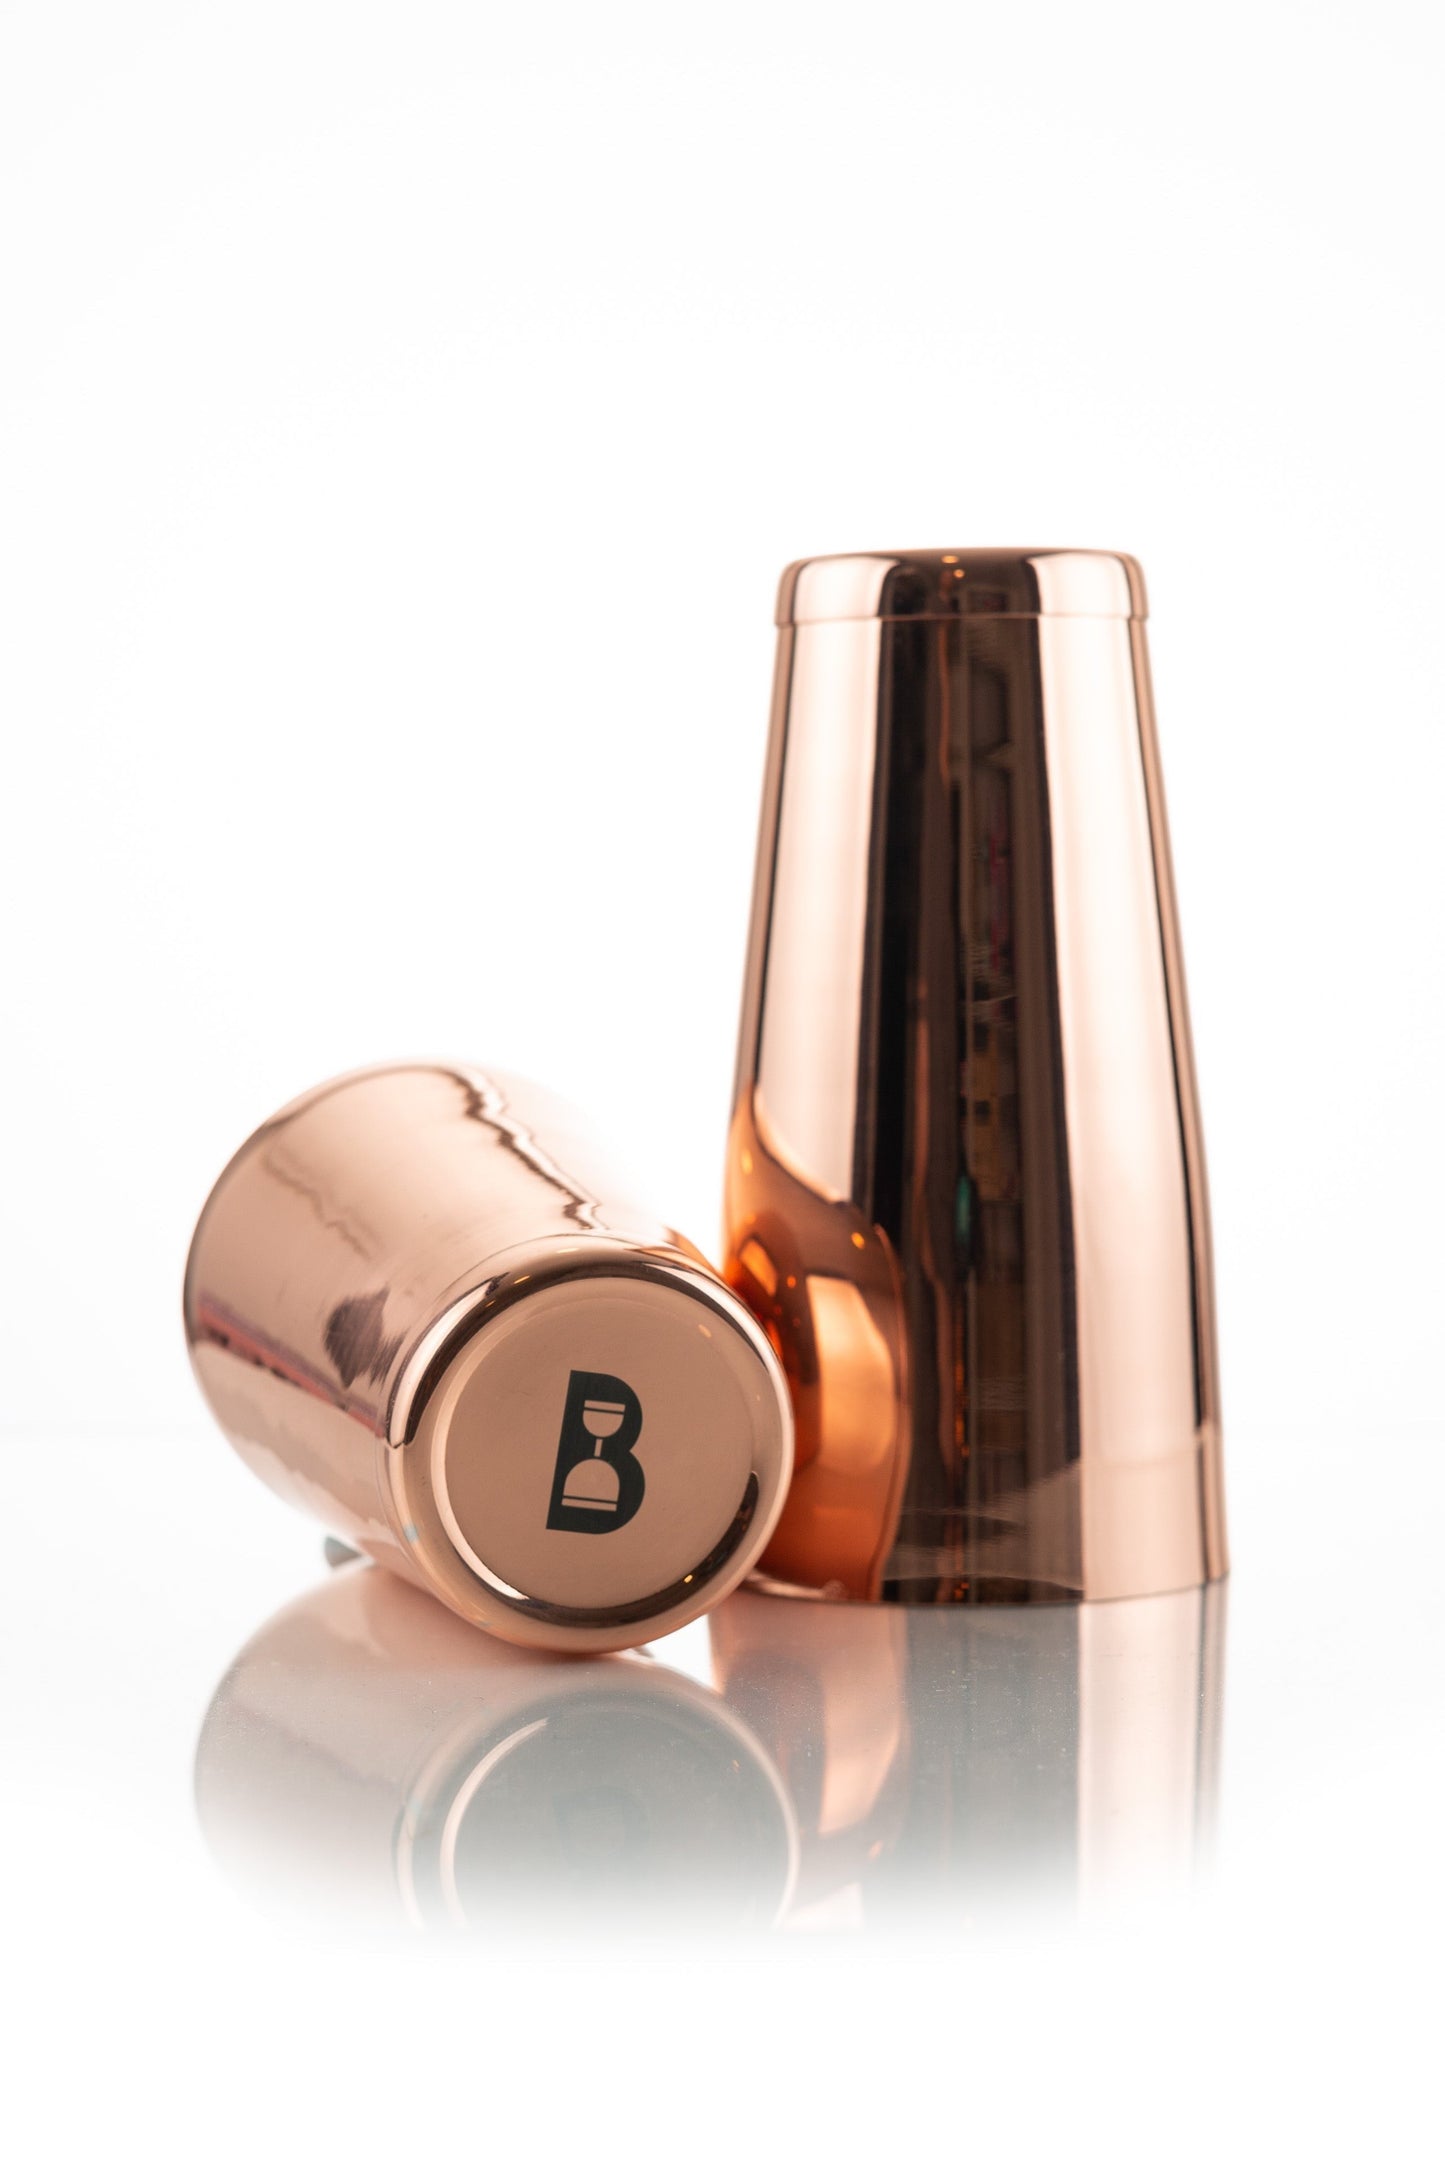 Solid 100% Copper and 100% Brass Shakers